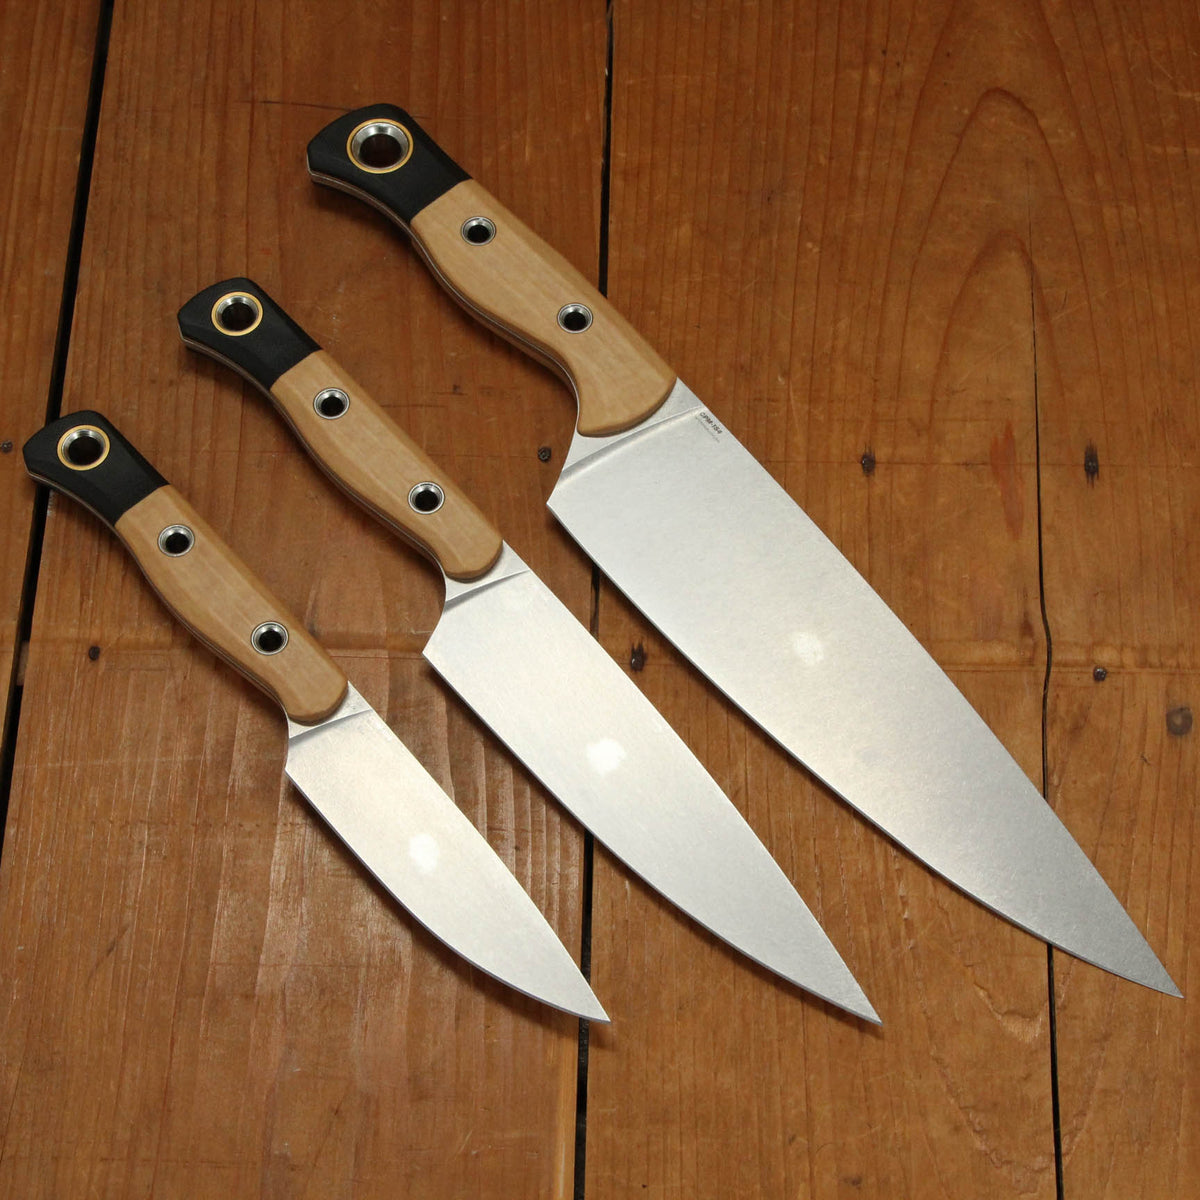 Benchmade Cutlery Drop Point CPM-154 Fixed Blade Maple Valley Richlite Handle Knife Set - 3 Pieces